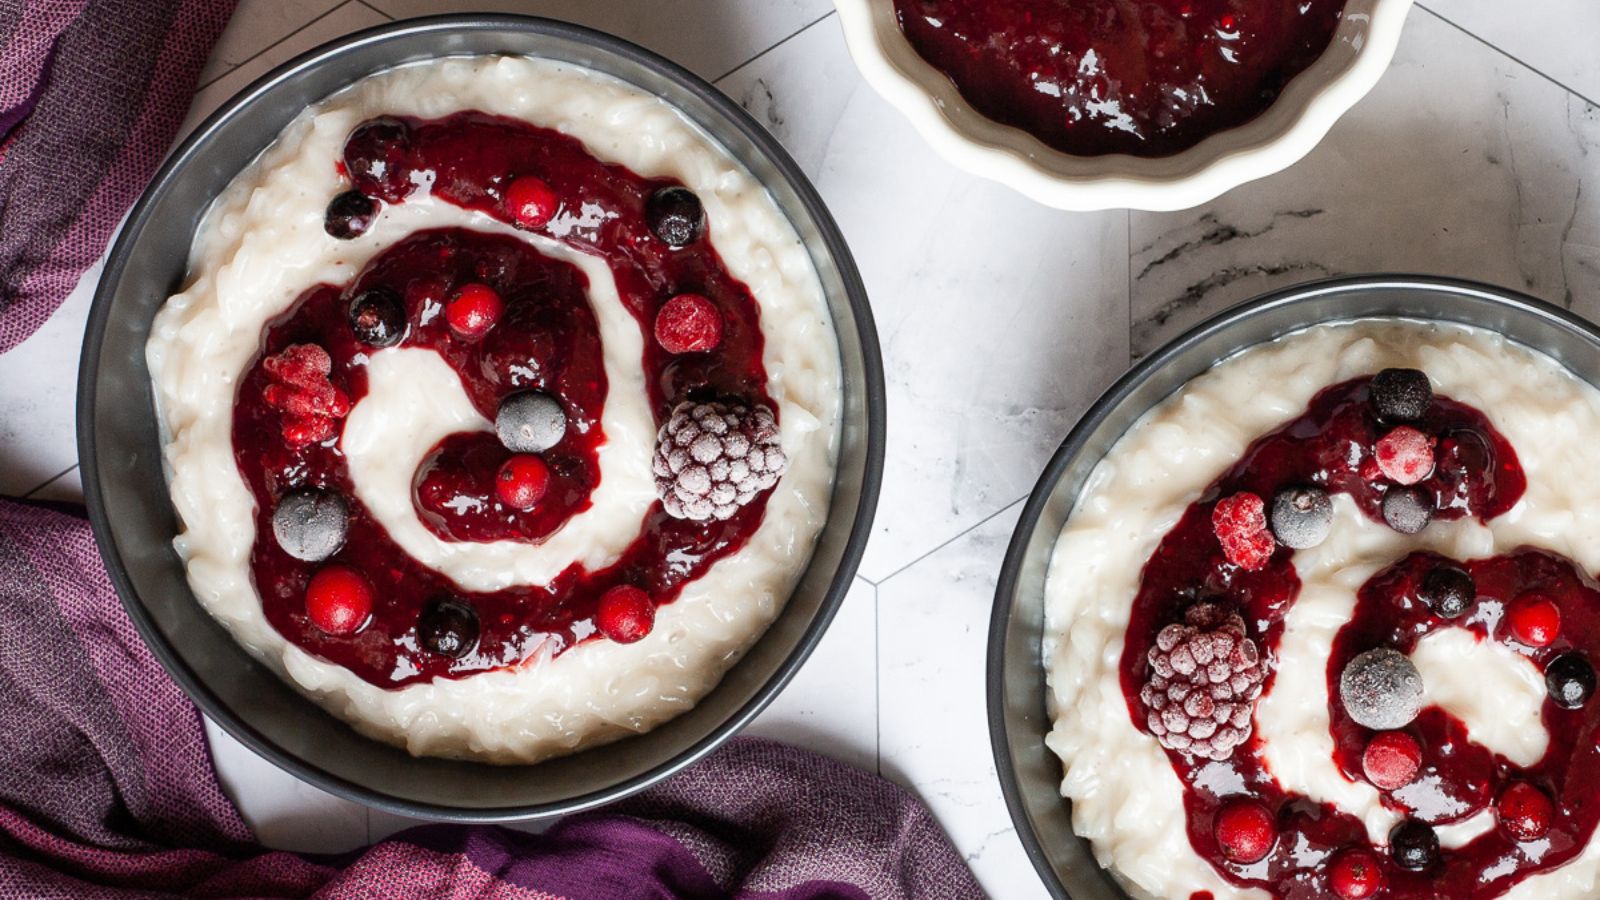 Sweet Surprises for Valentine’s Day: 18 Desserts to Delight and Impress